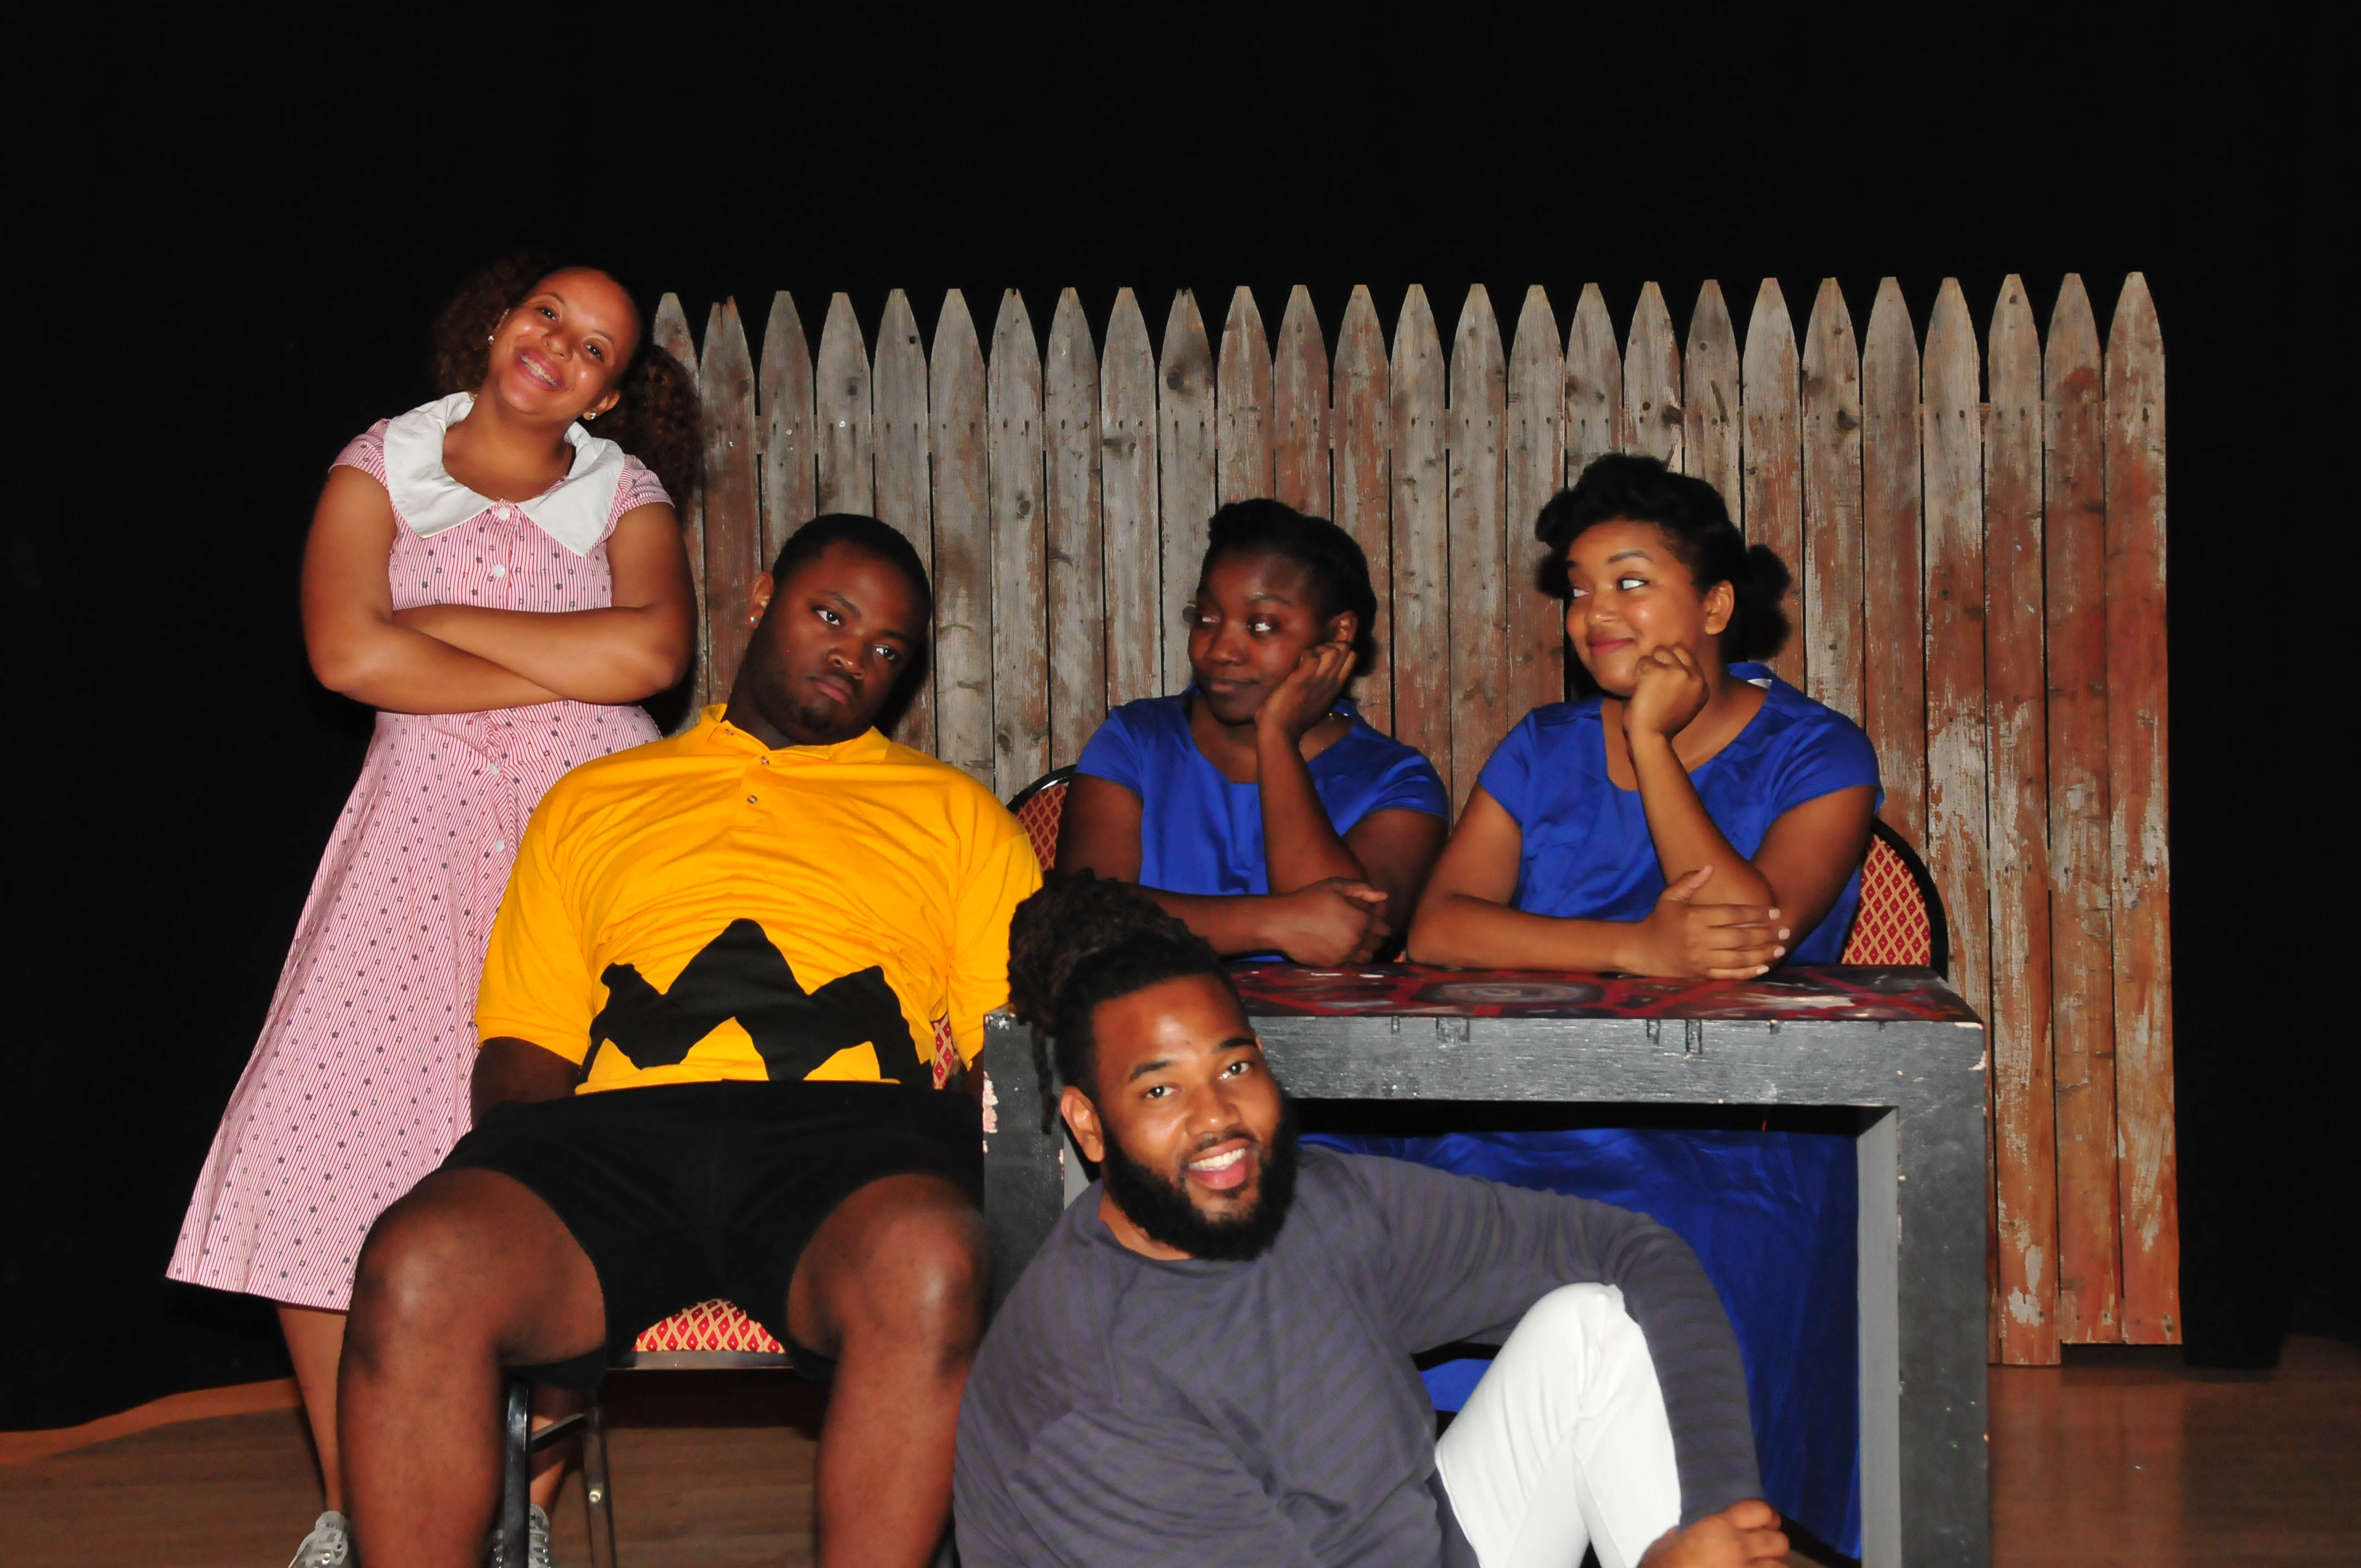 (L-r) Sháe Ross (as Sally), Anthony McIver (Charlie Brown), Jahselan White (Lucy understudy), Marquita Richardson (Lucy) and Tyrone J. Ashley Jr. (Schroeder).